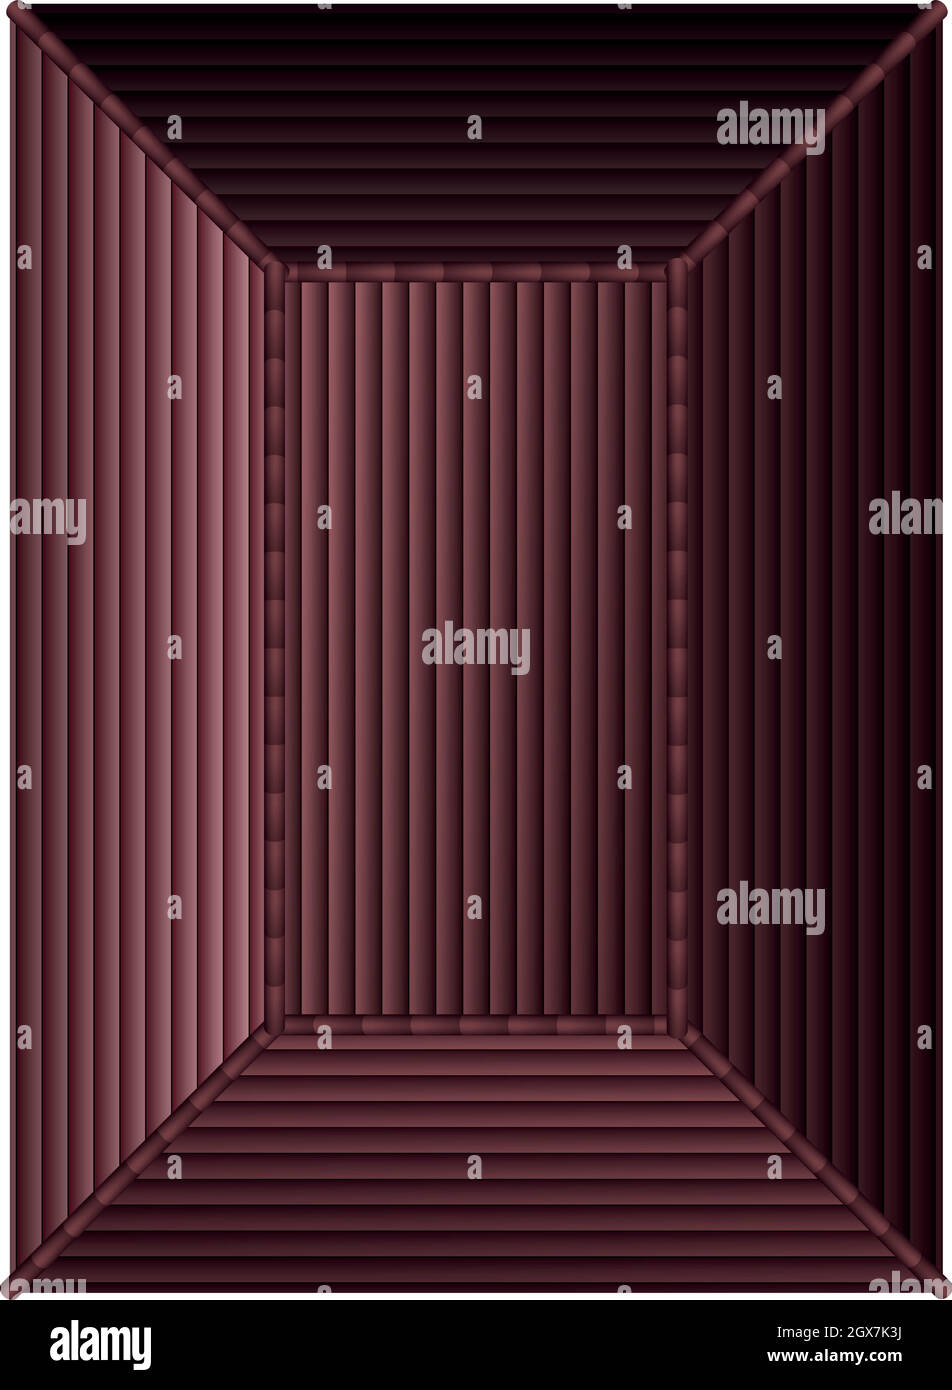 House roof Stock Vector